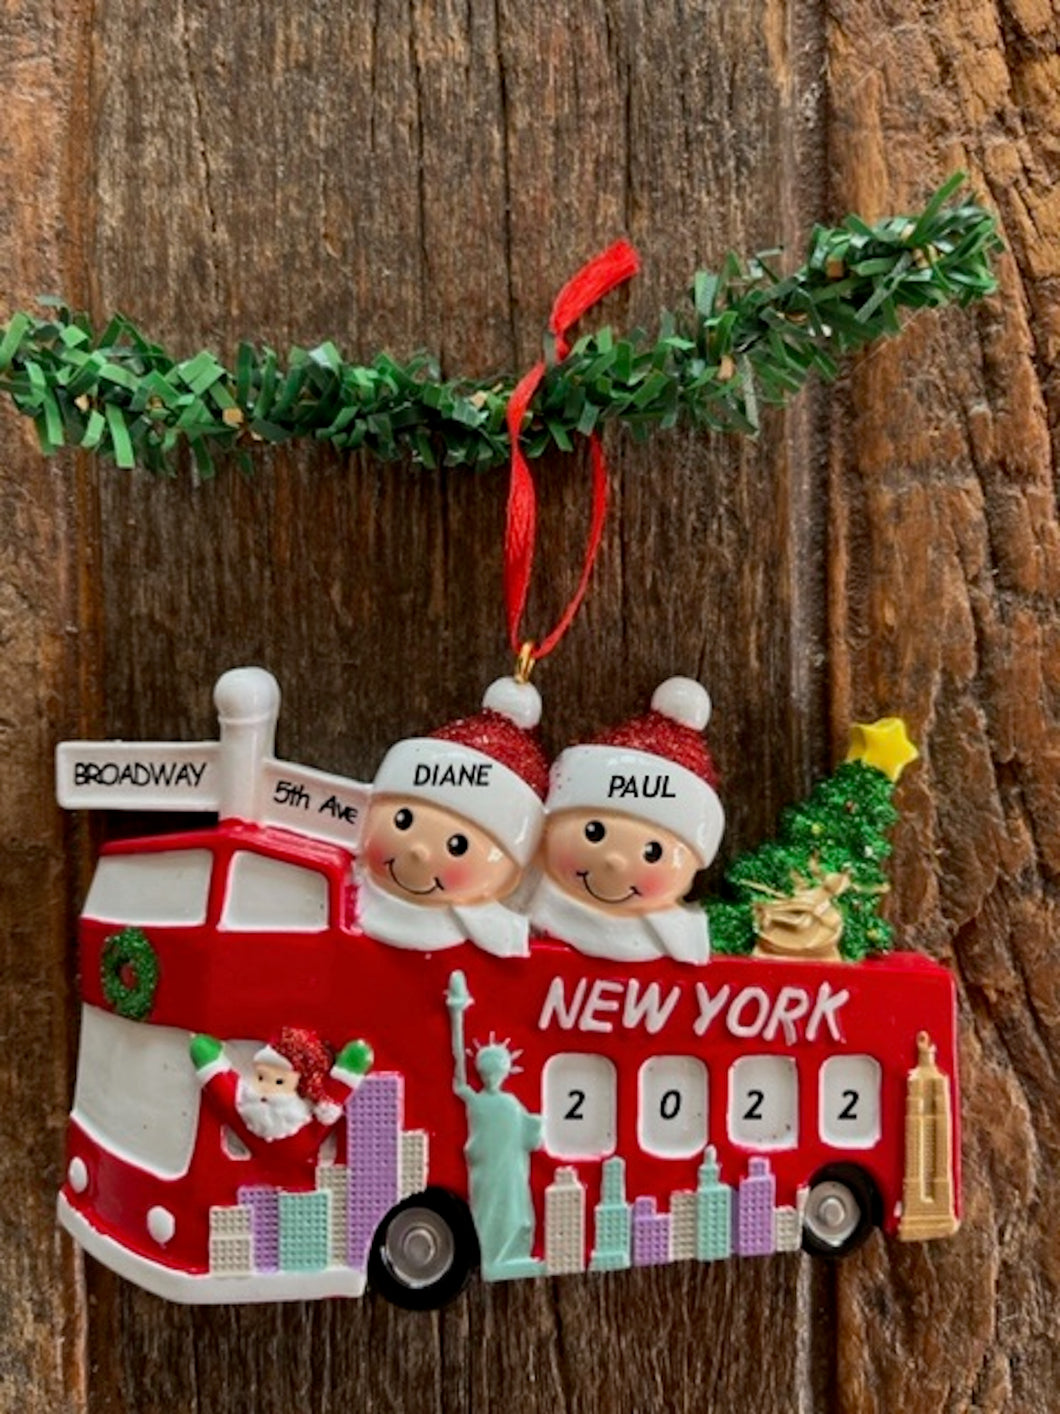 New York Tour Bus Traveling the City Ornament Personalization